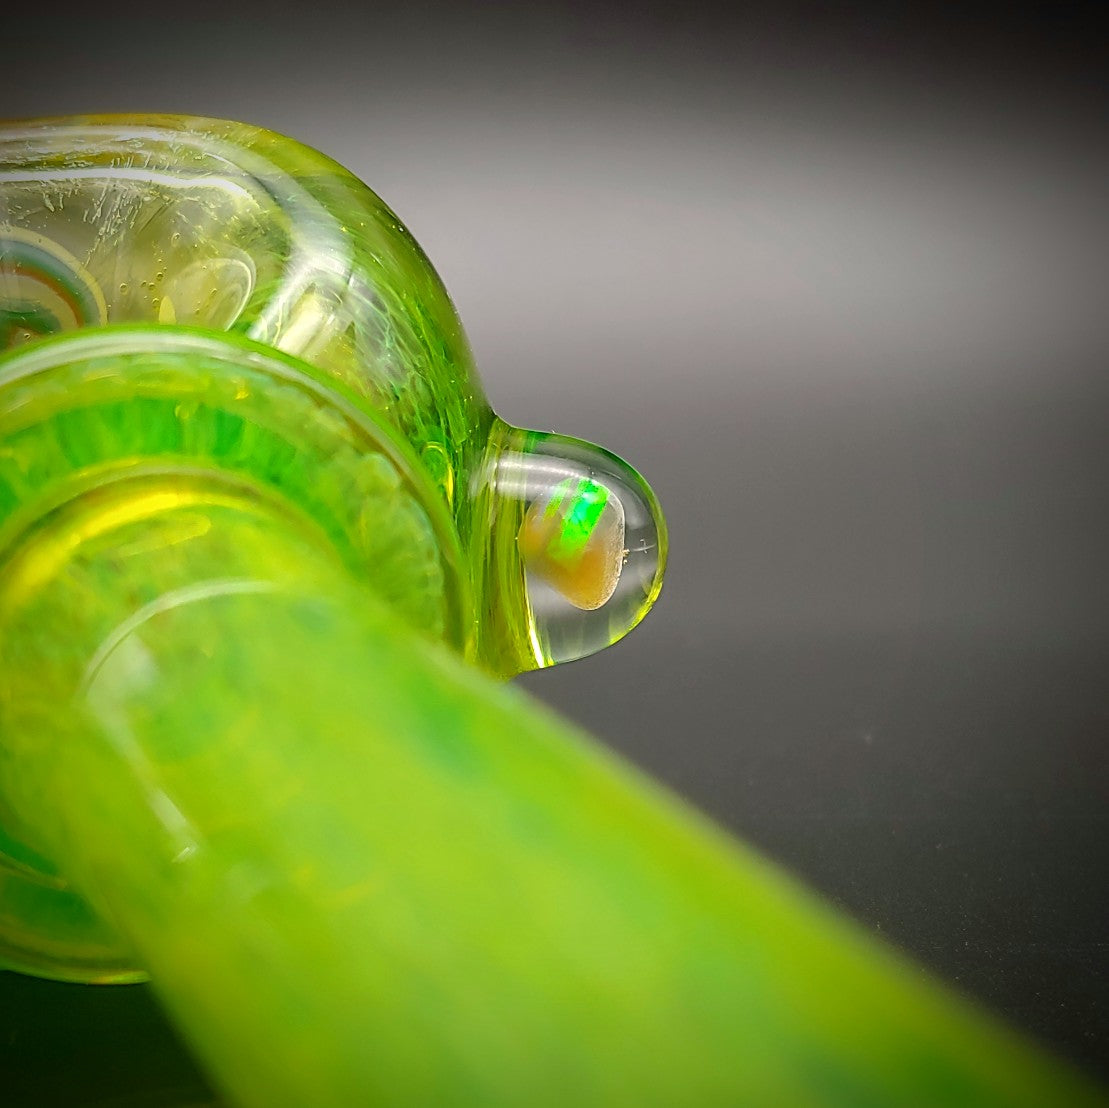 Green Bowtie Wigwag Hand Pipe (Ready To Ship)